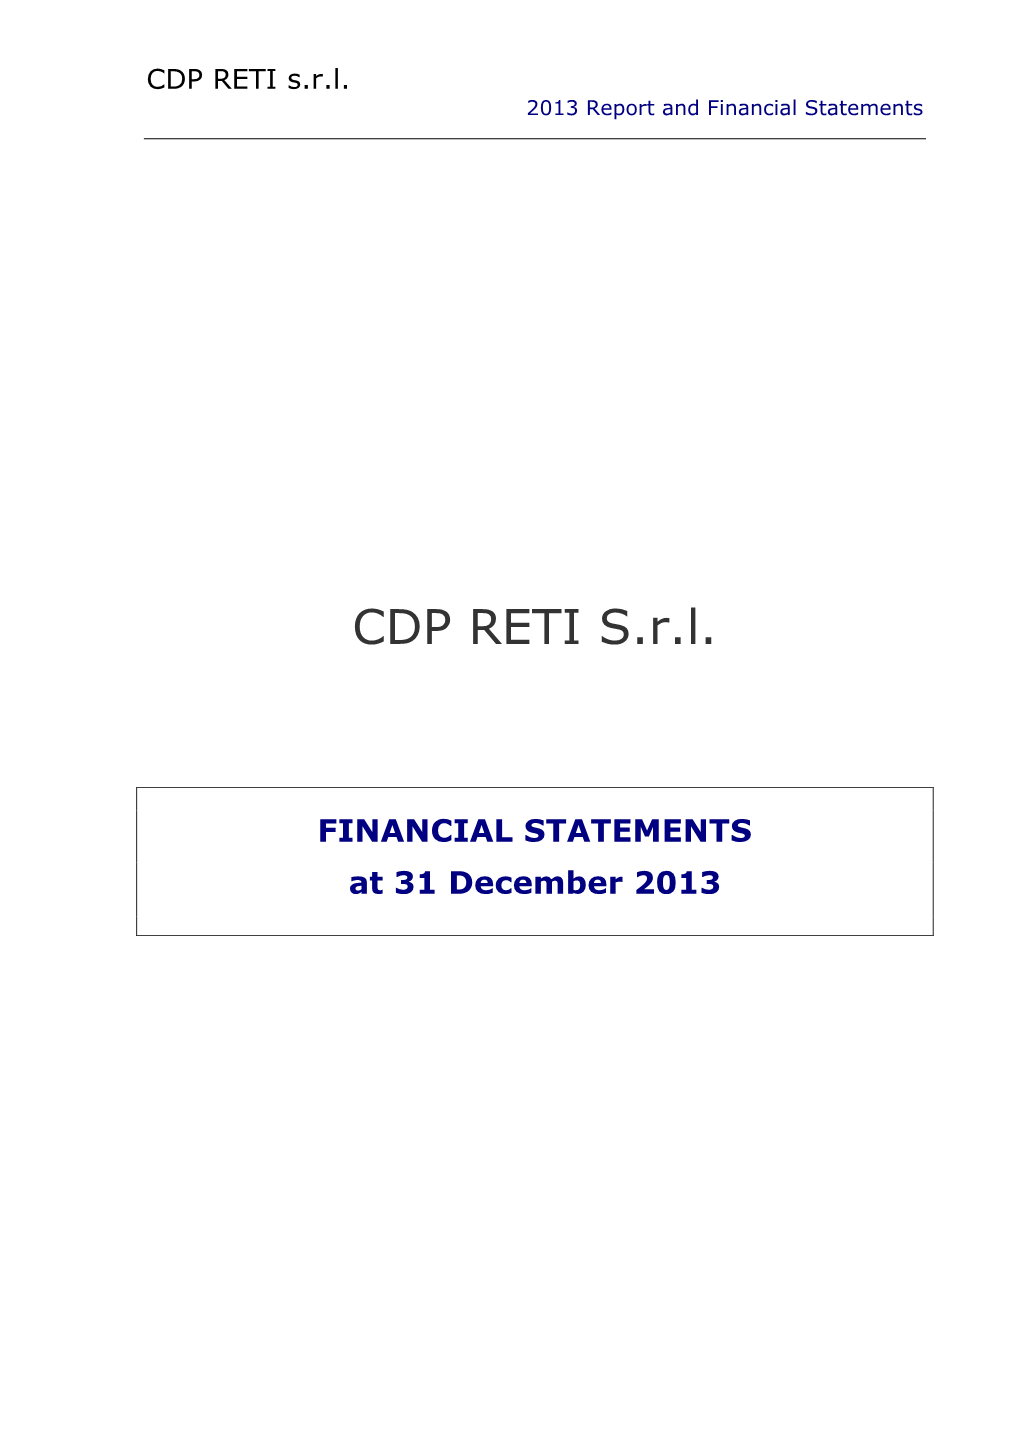 CDP RETI S.R.L. 2013 Report and Financial Statements